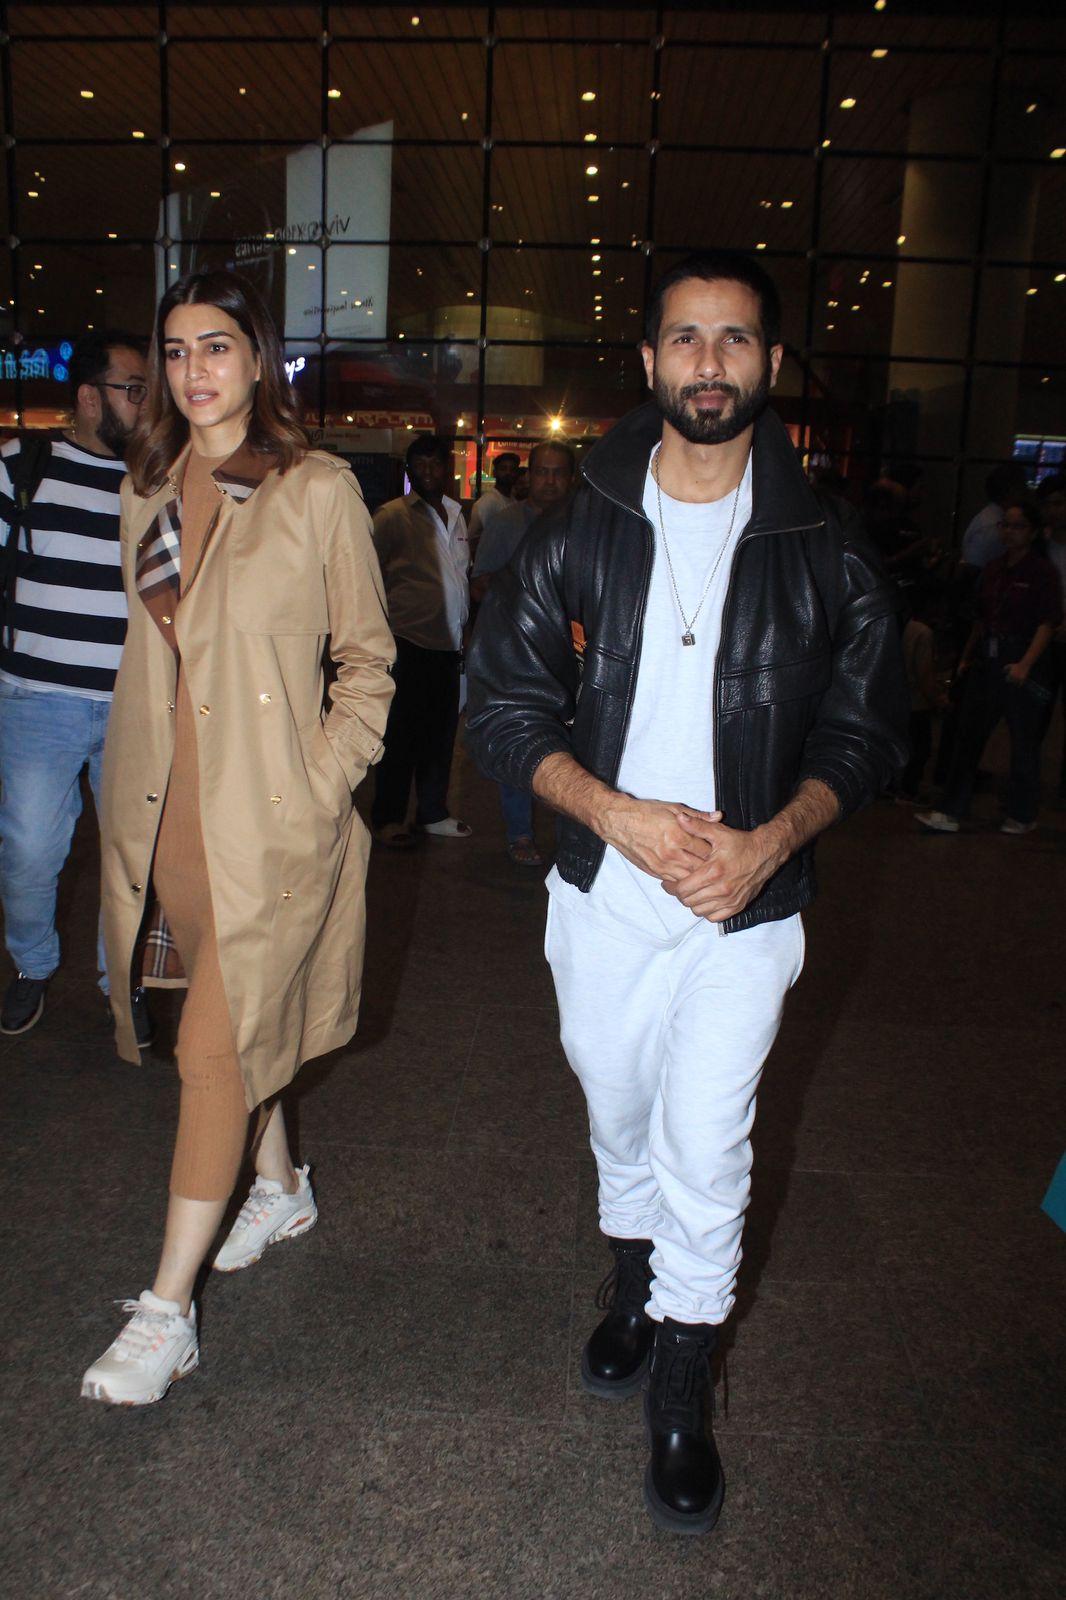 Shahid Kapoor and Kriti Sanon were all smiles as they returned to city together